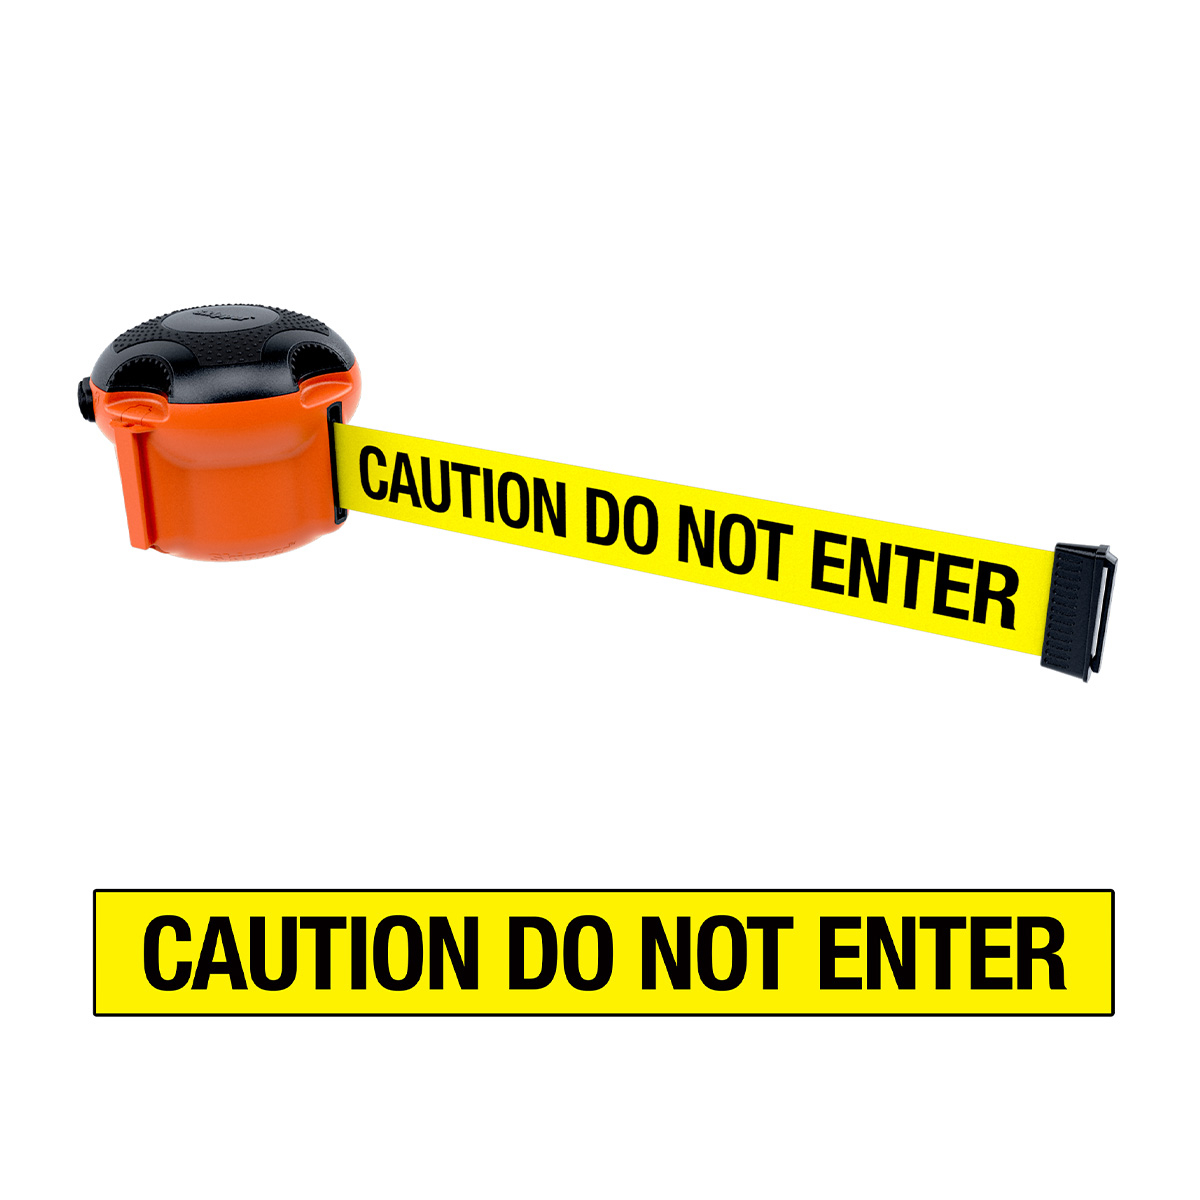 Skipper XS Retractable Belt Barrier In Orange With Caution Do Not Enter Message Barrier Tape